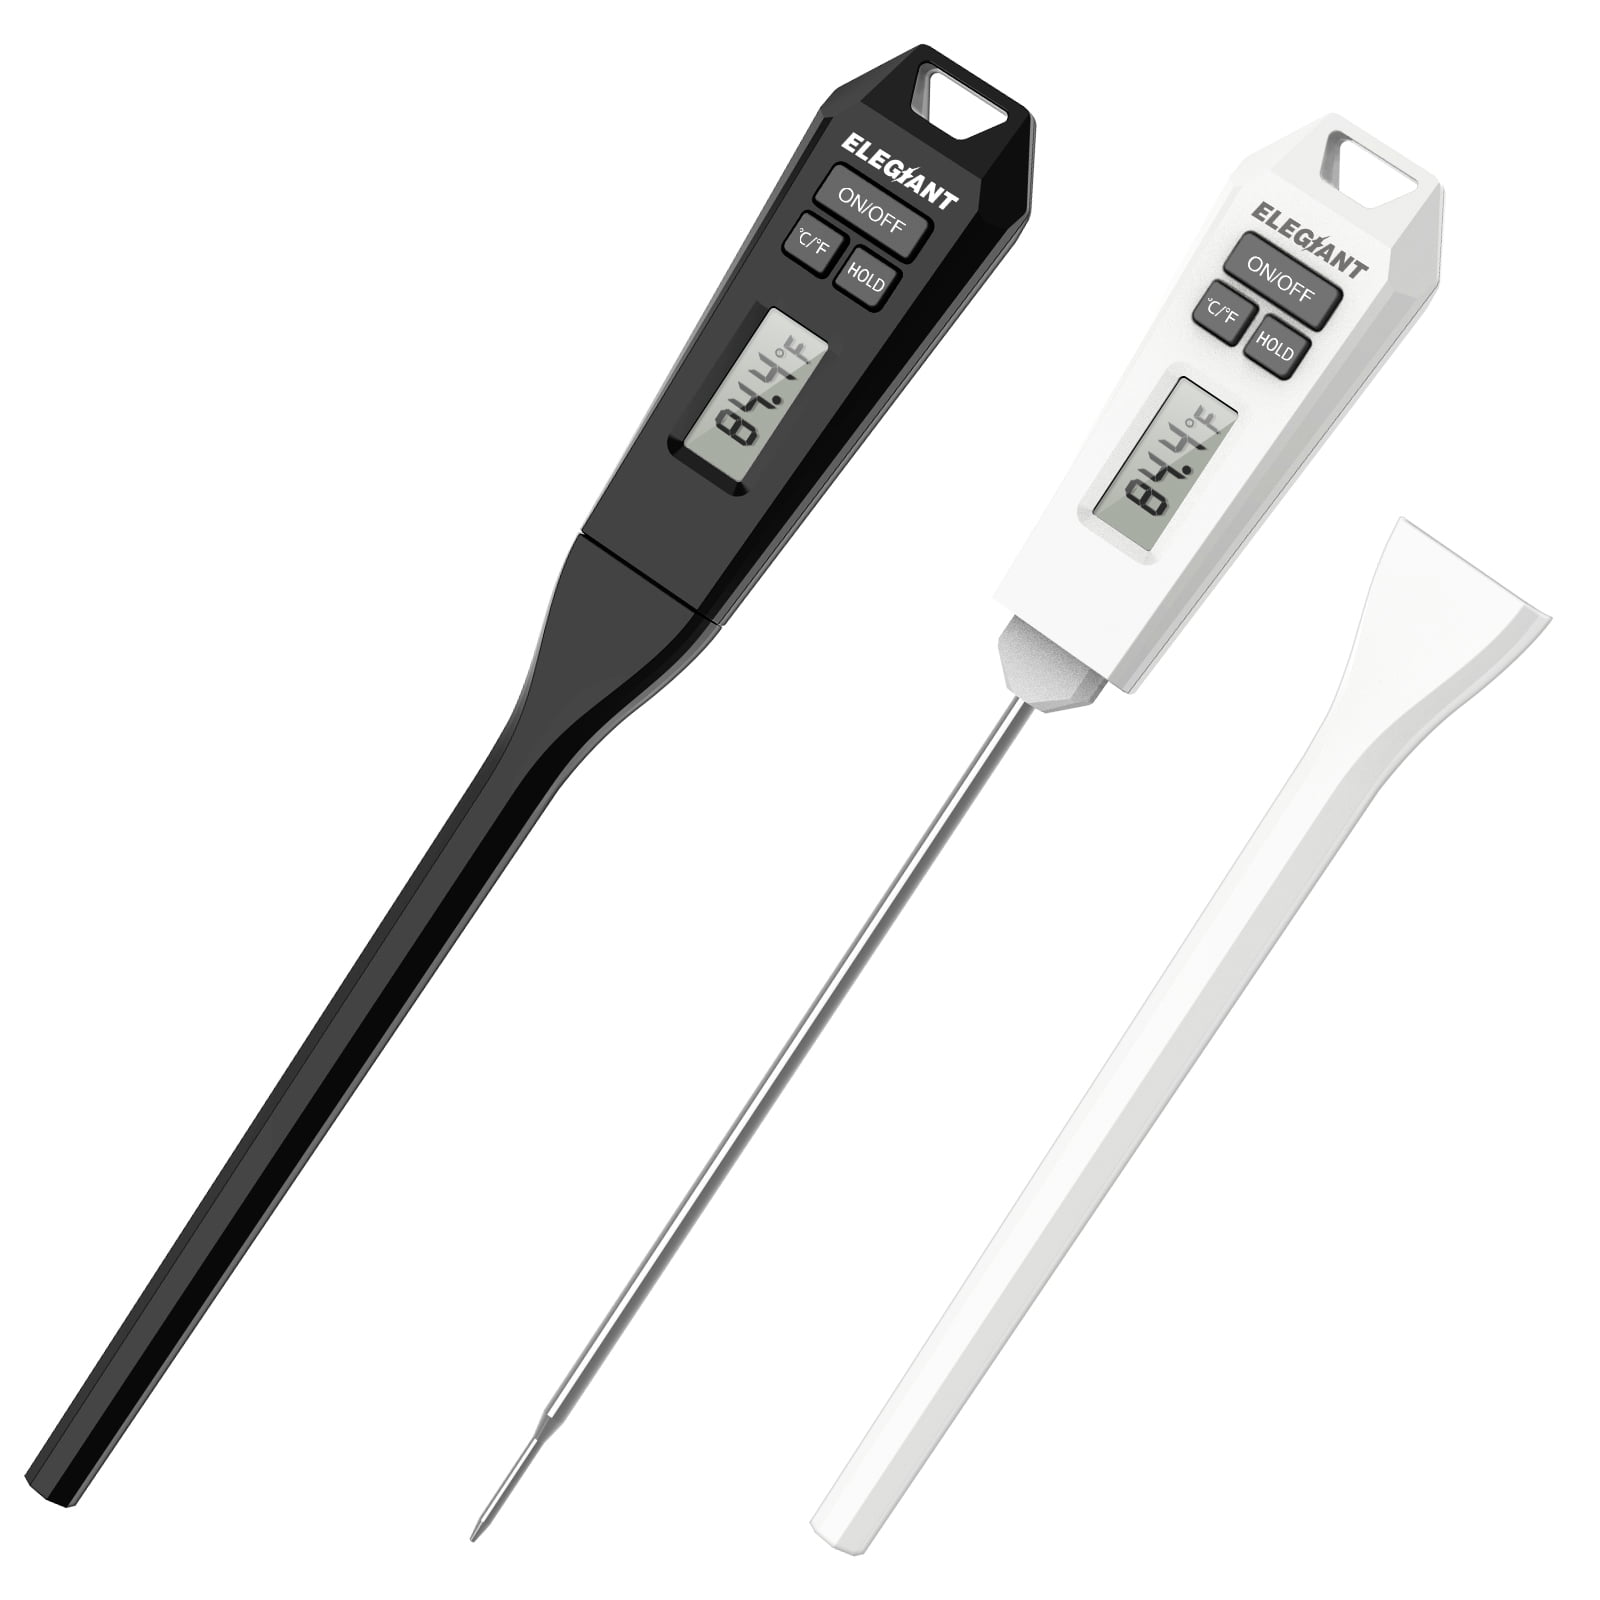 New Meat Candy Jam Cooking Digital Thermometer Probe Food Kitchen BBQ Deep Fry 